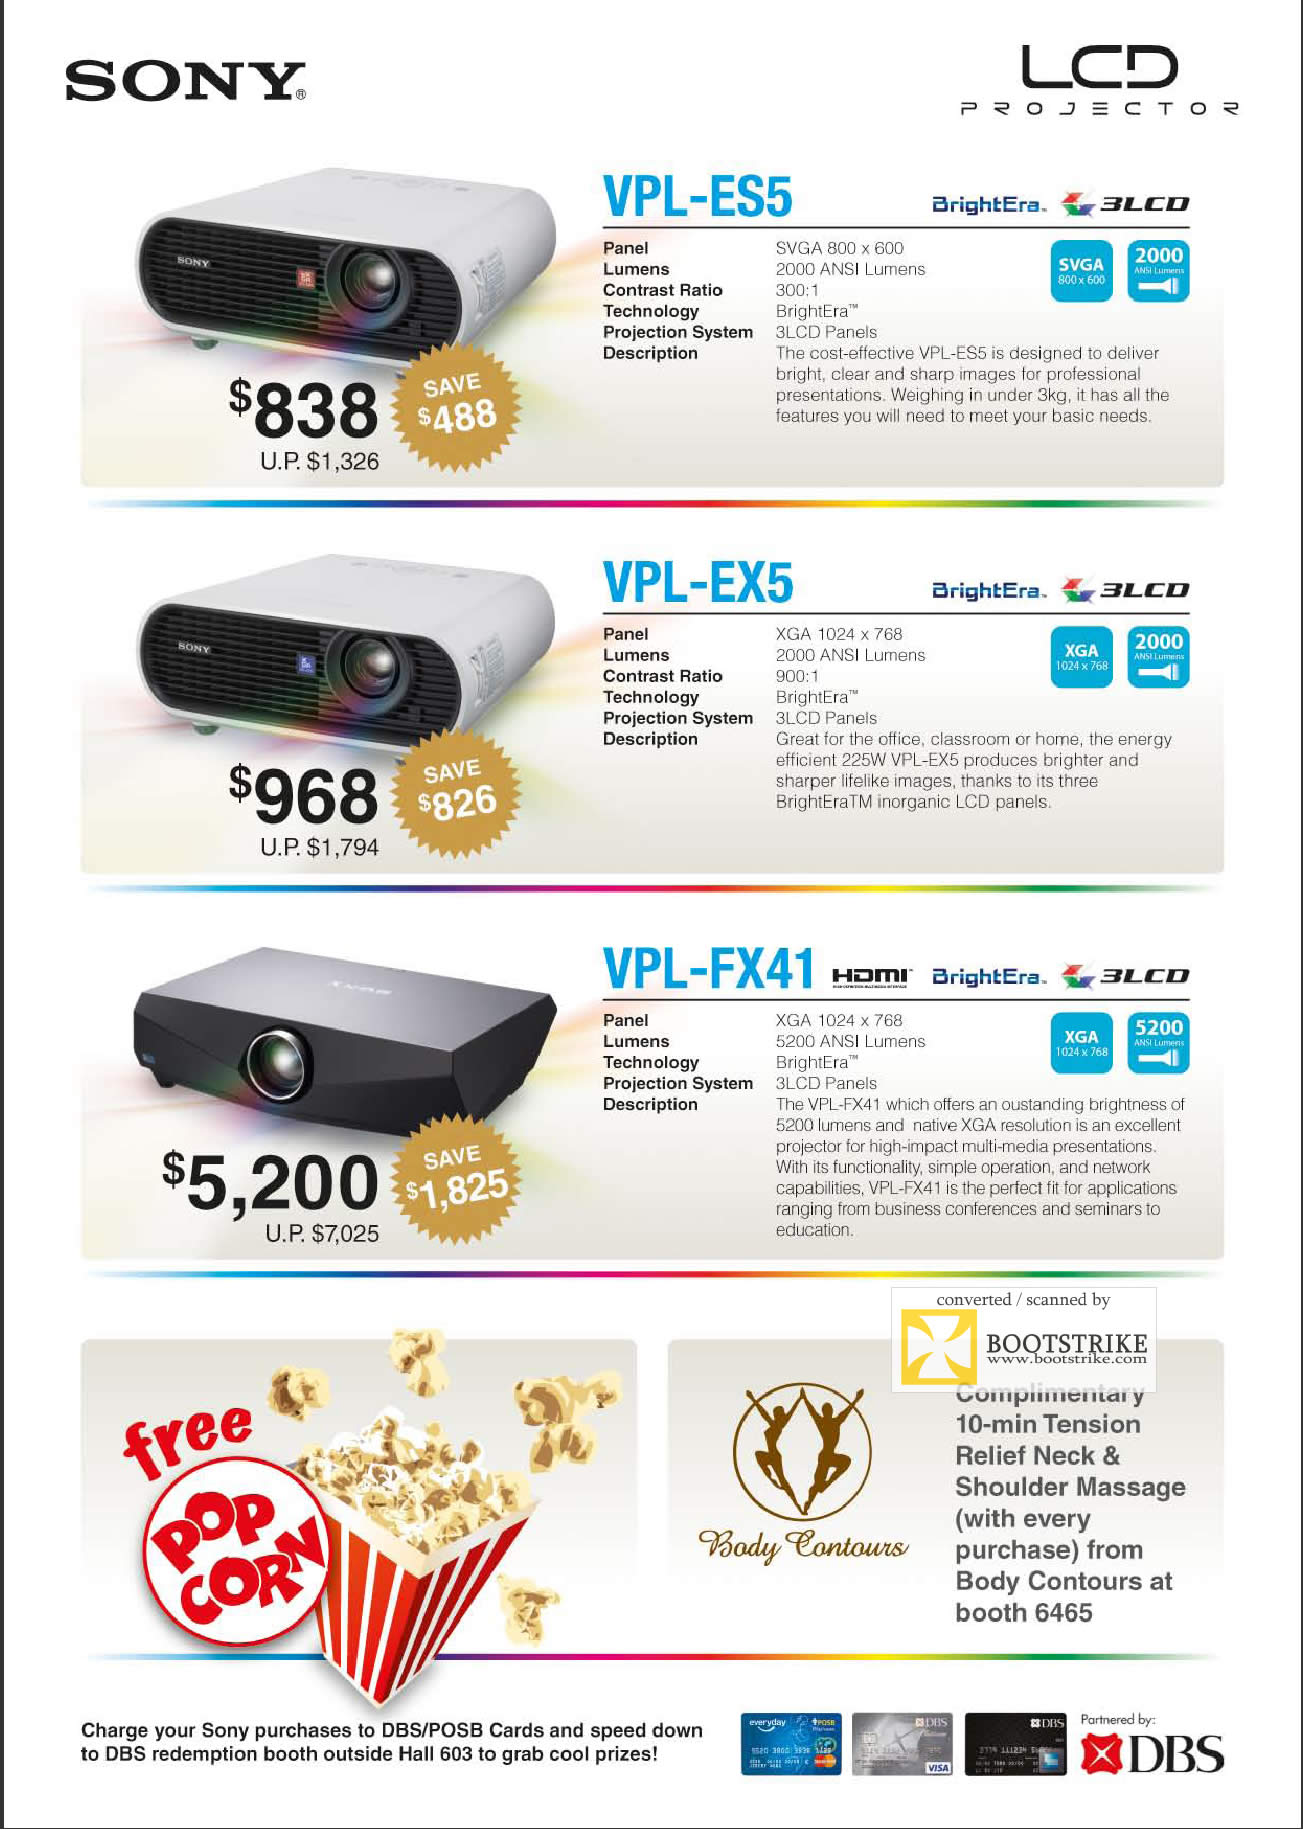 IT Show 2009 price list image brochure of Sony LCD Projectors